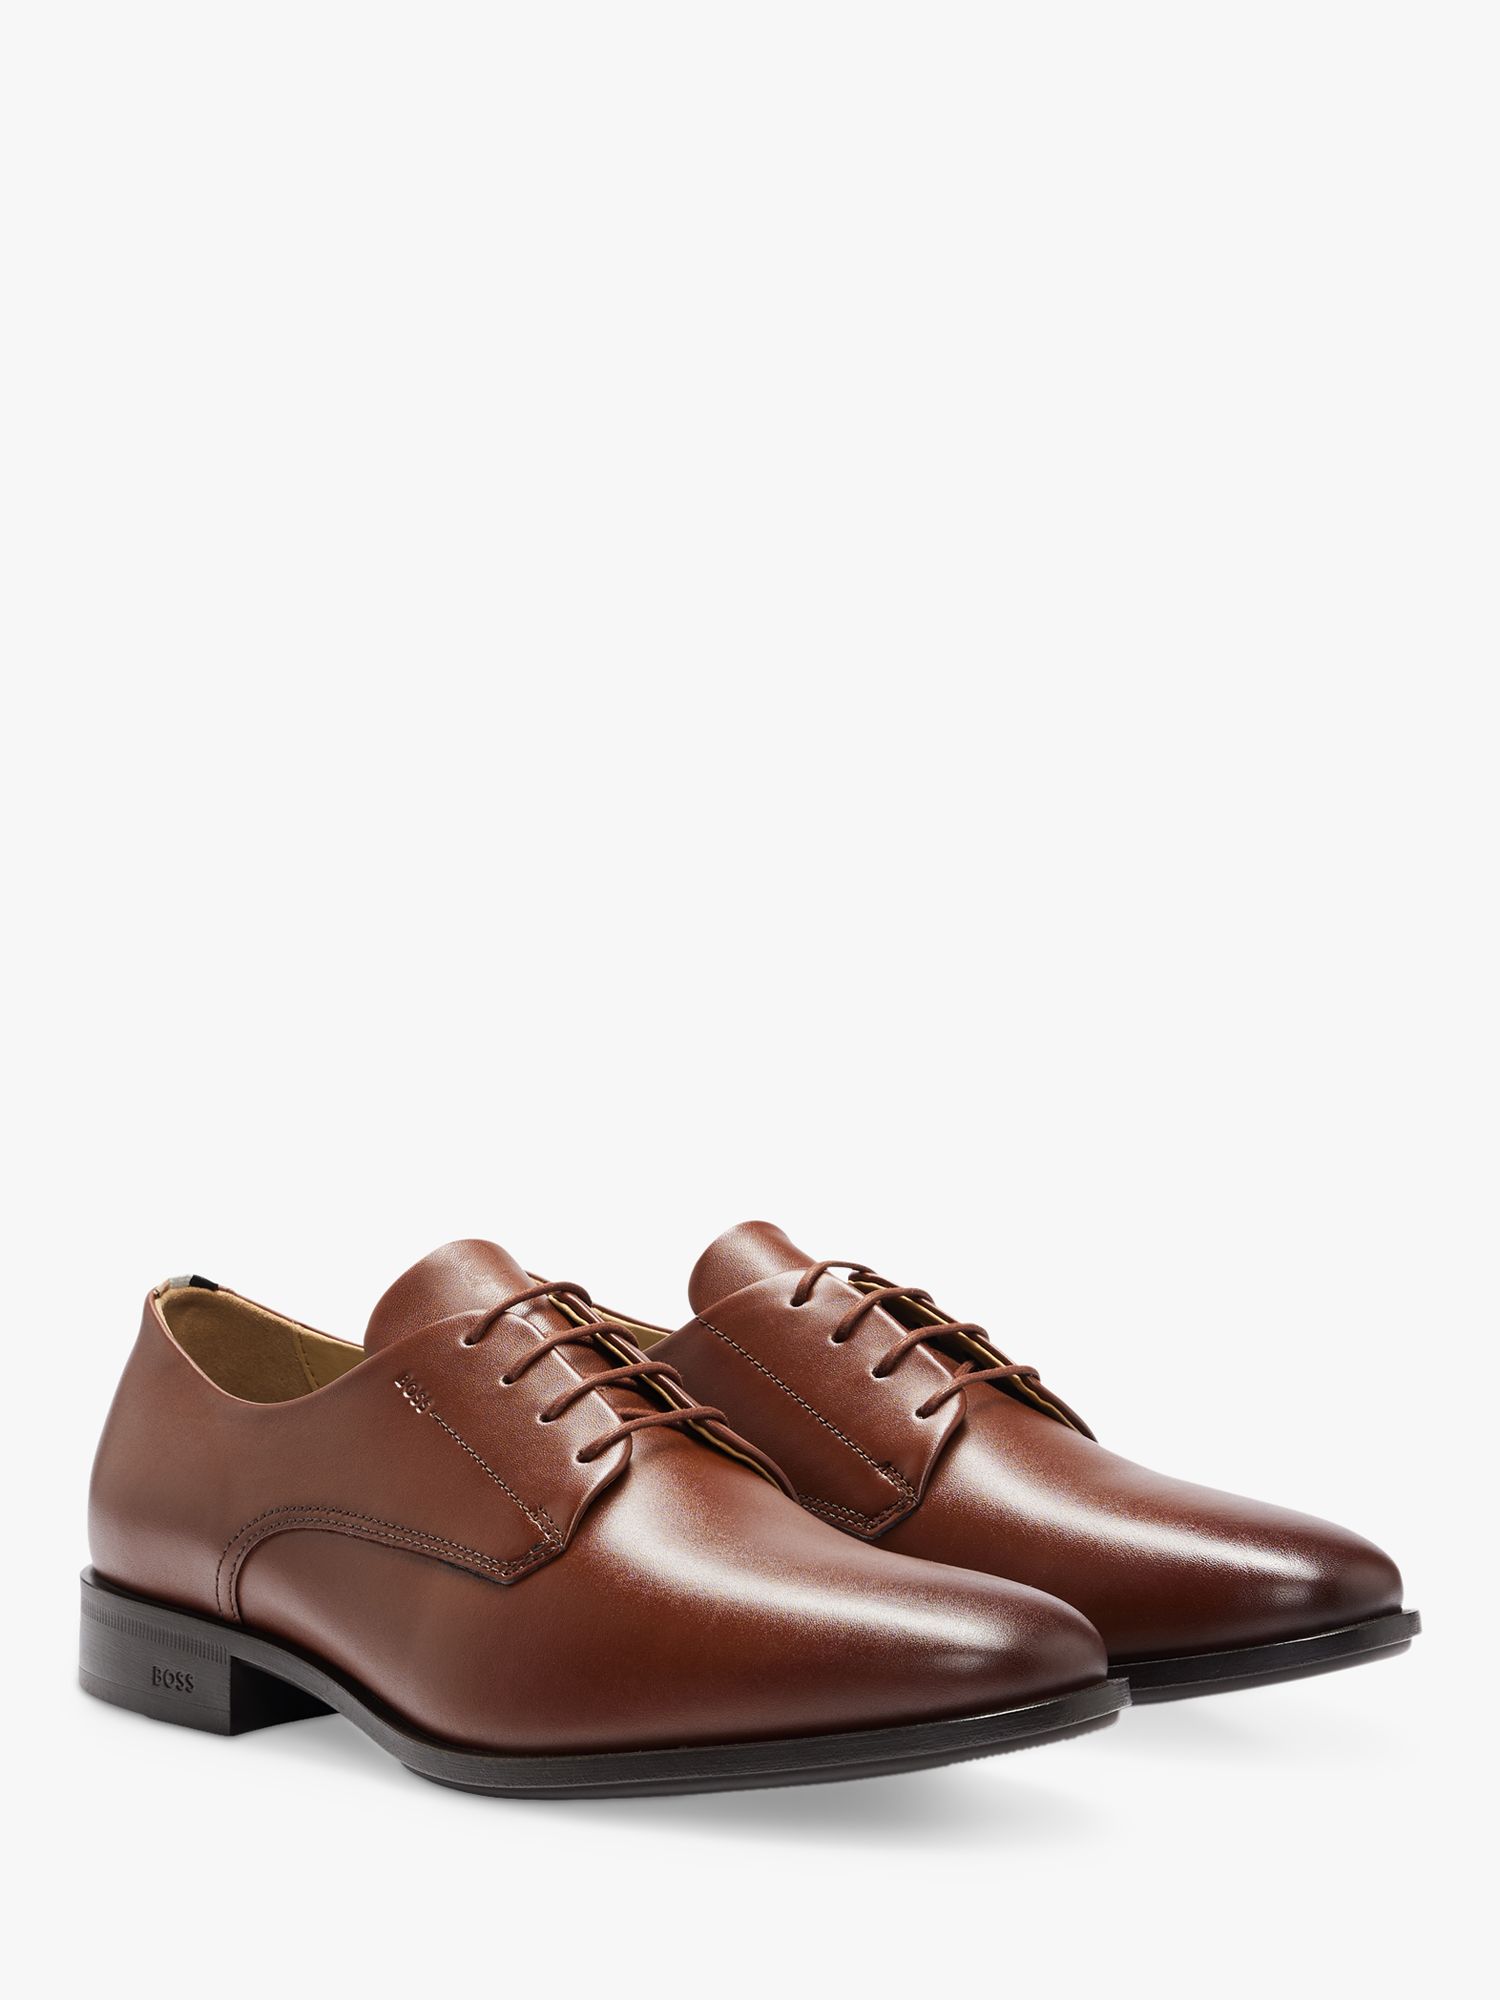 BOSS Colby Leather Derby Shoes, Medium Brown, 6